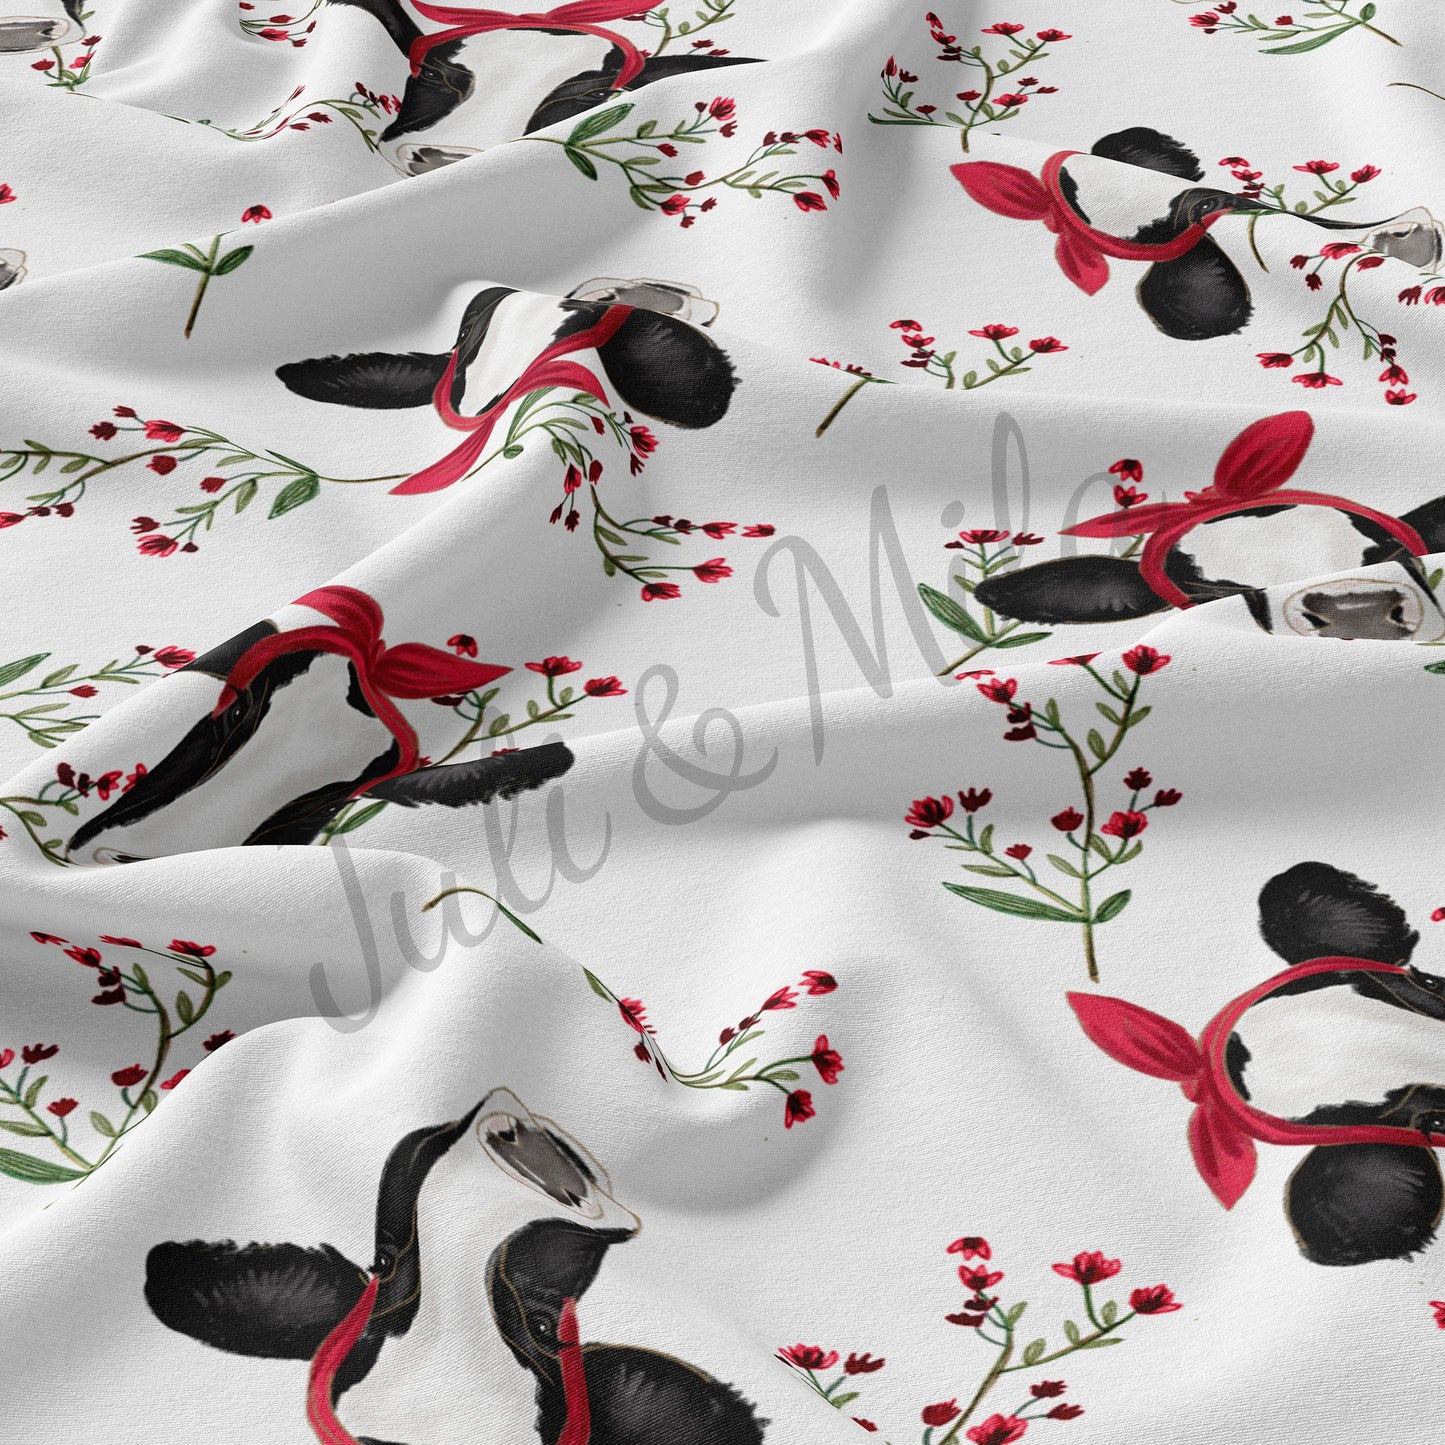 DBP Fabric Double Brushed Polyester Fabric  Cow